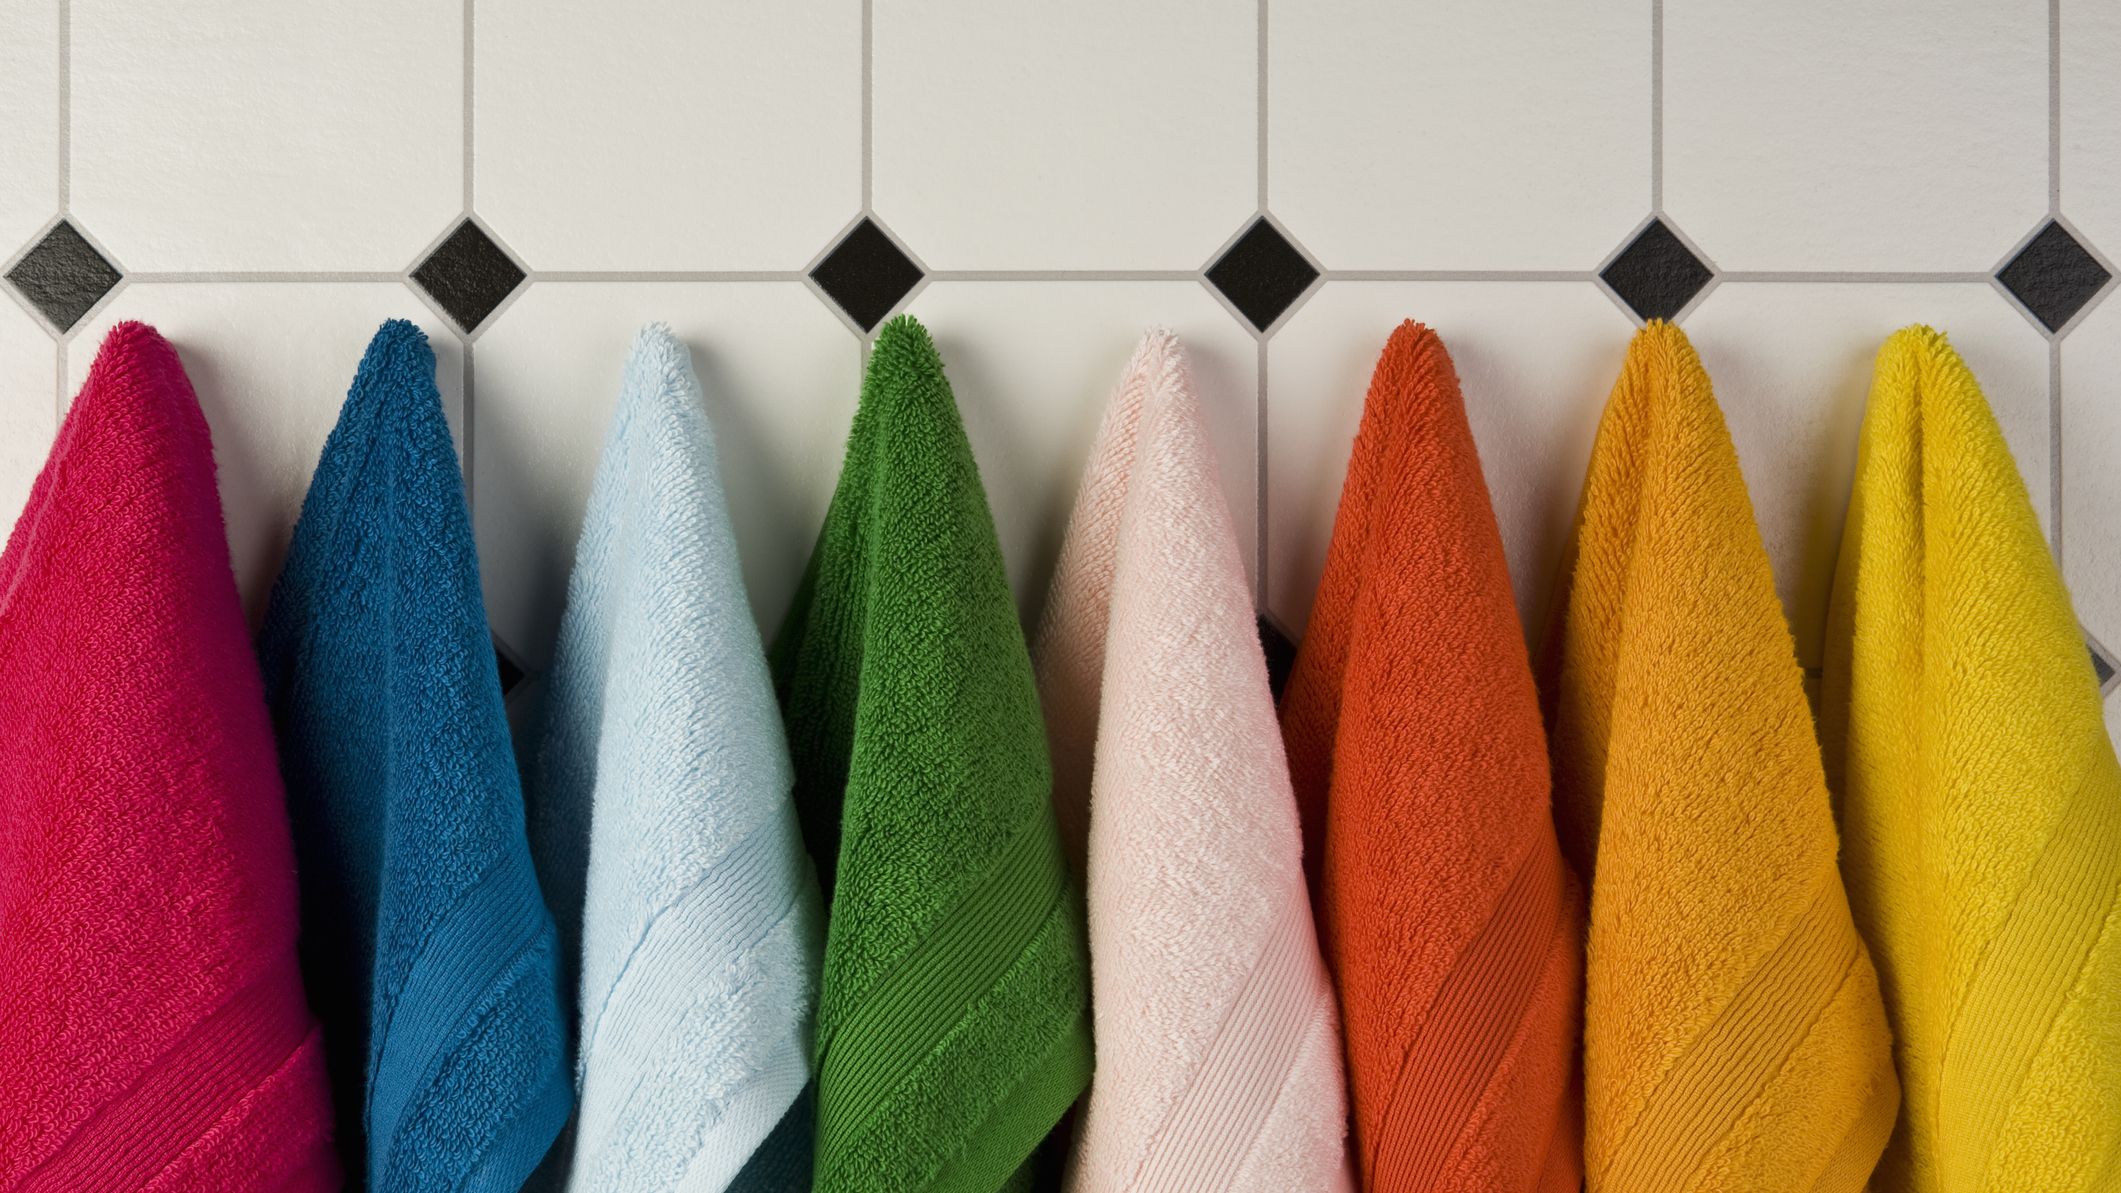 How to Break In Your Bath Towels: All About Your New Towels' Break-I